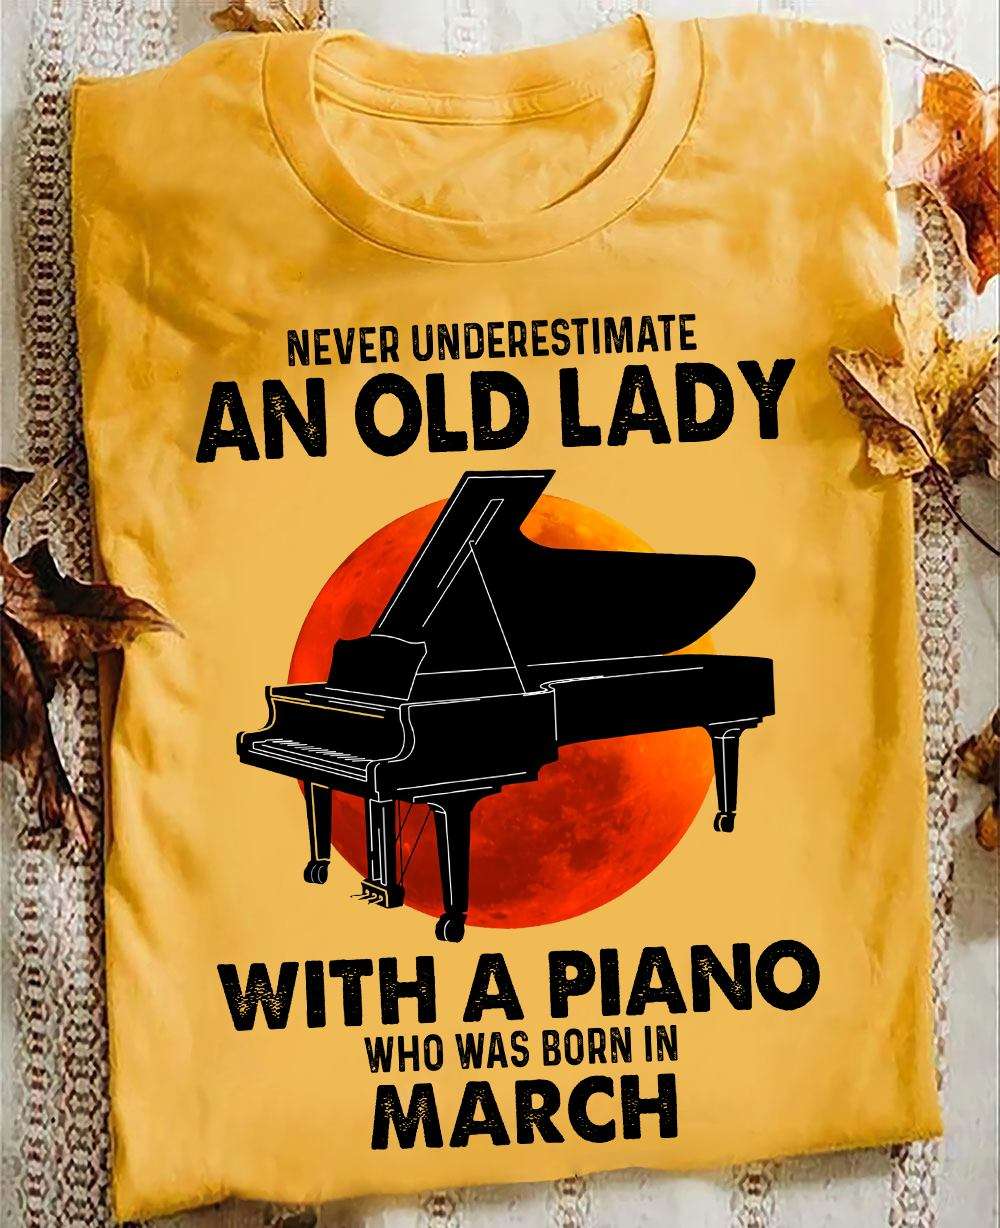 March Birthday Piano Woman - Never underestimate an old lady with a piano who was born in march